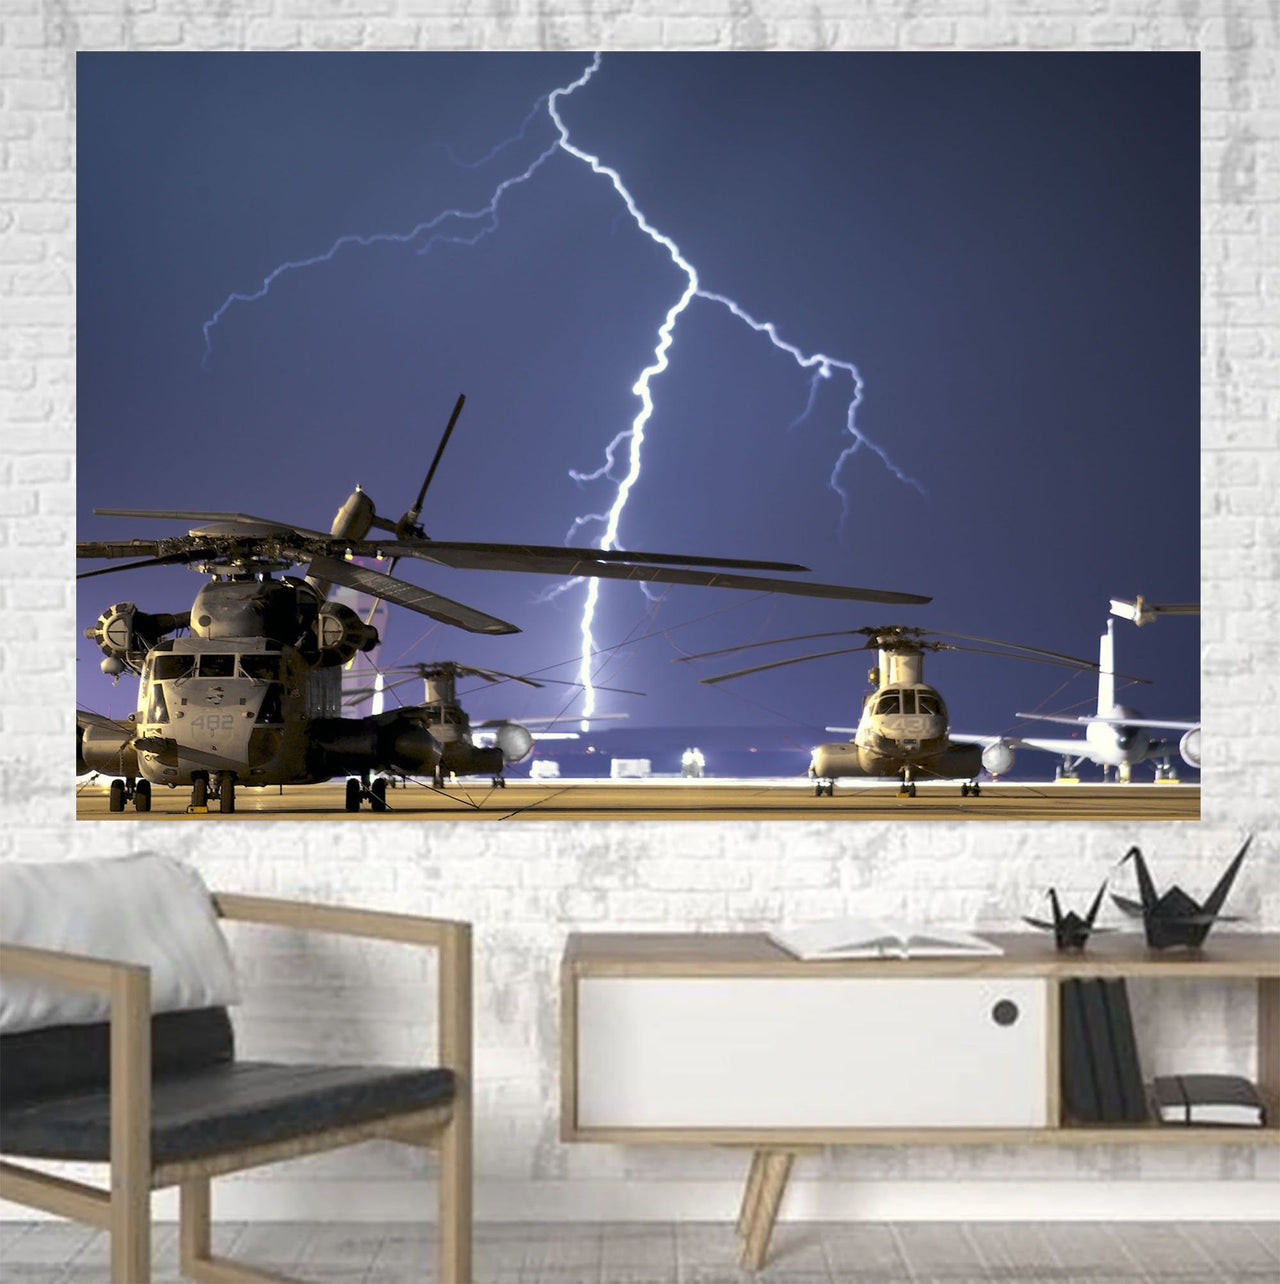 Helicopter & Lighting Strike Printed Canvas Posters (1 Piece) Aviation Shop 